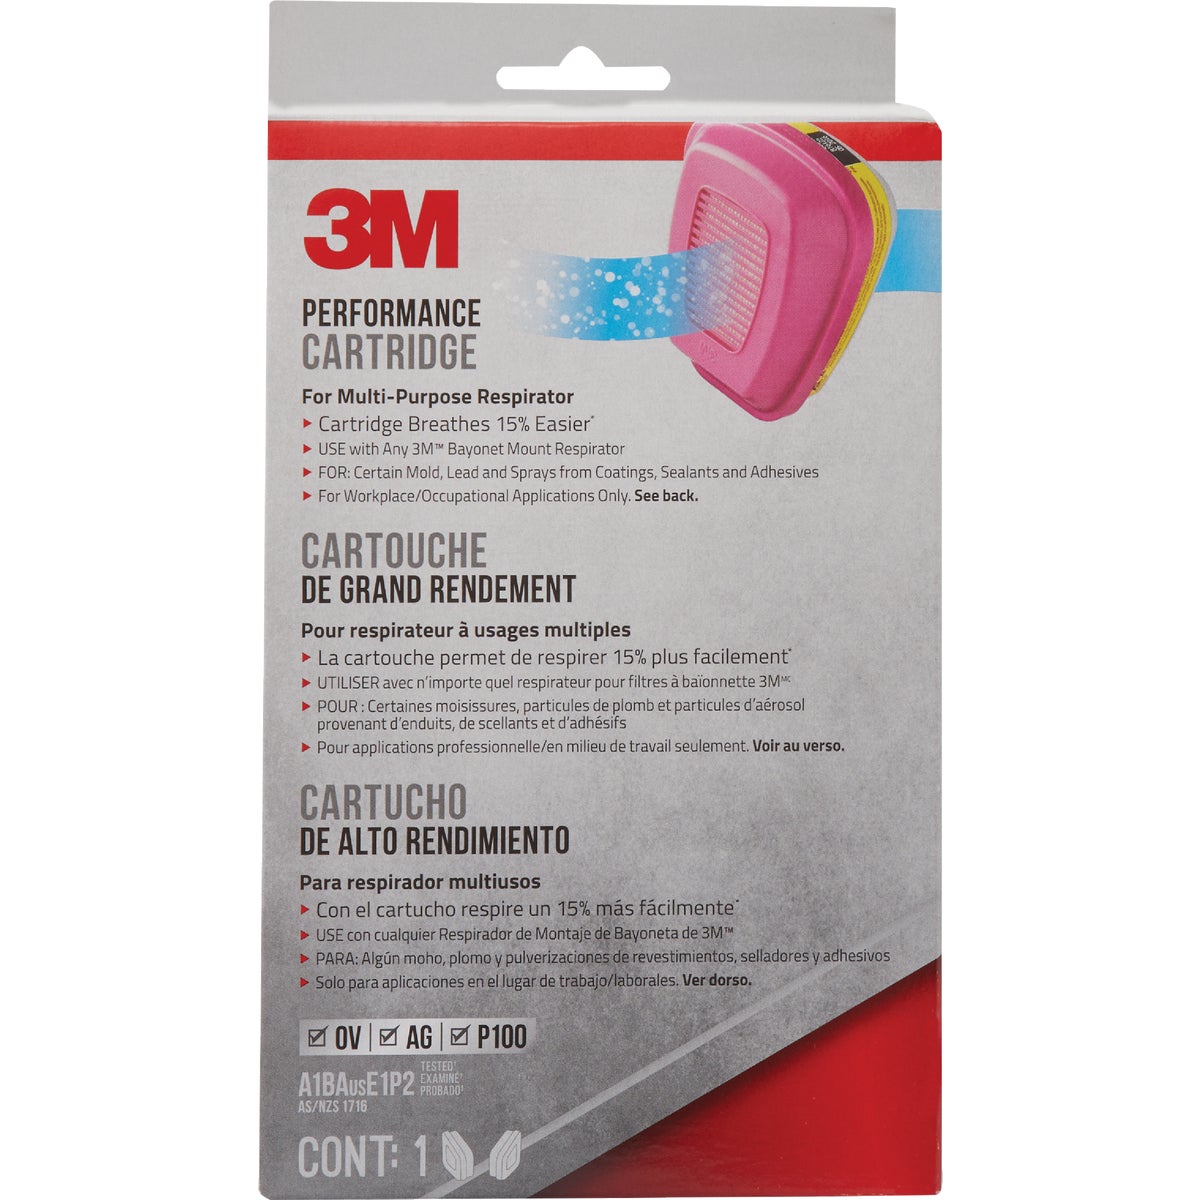 Item 337897, The 3M Replacement Cartridges for the 3M Multi-Purpose Respirator are 